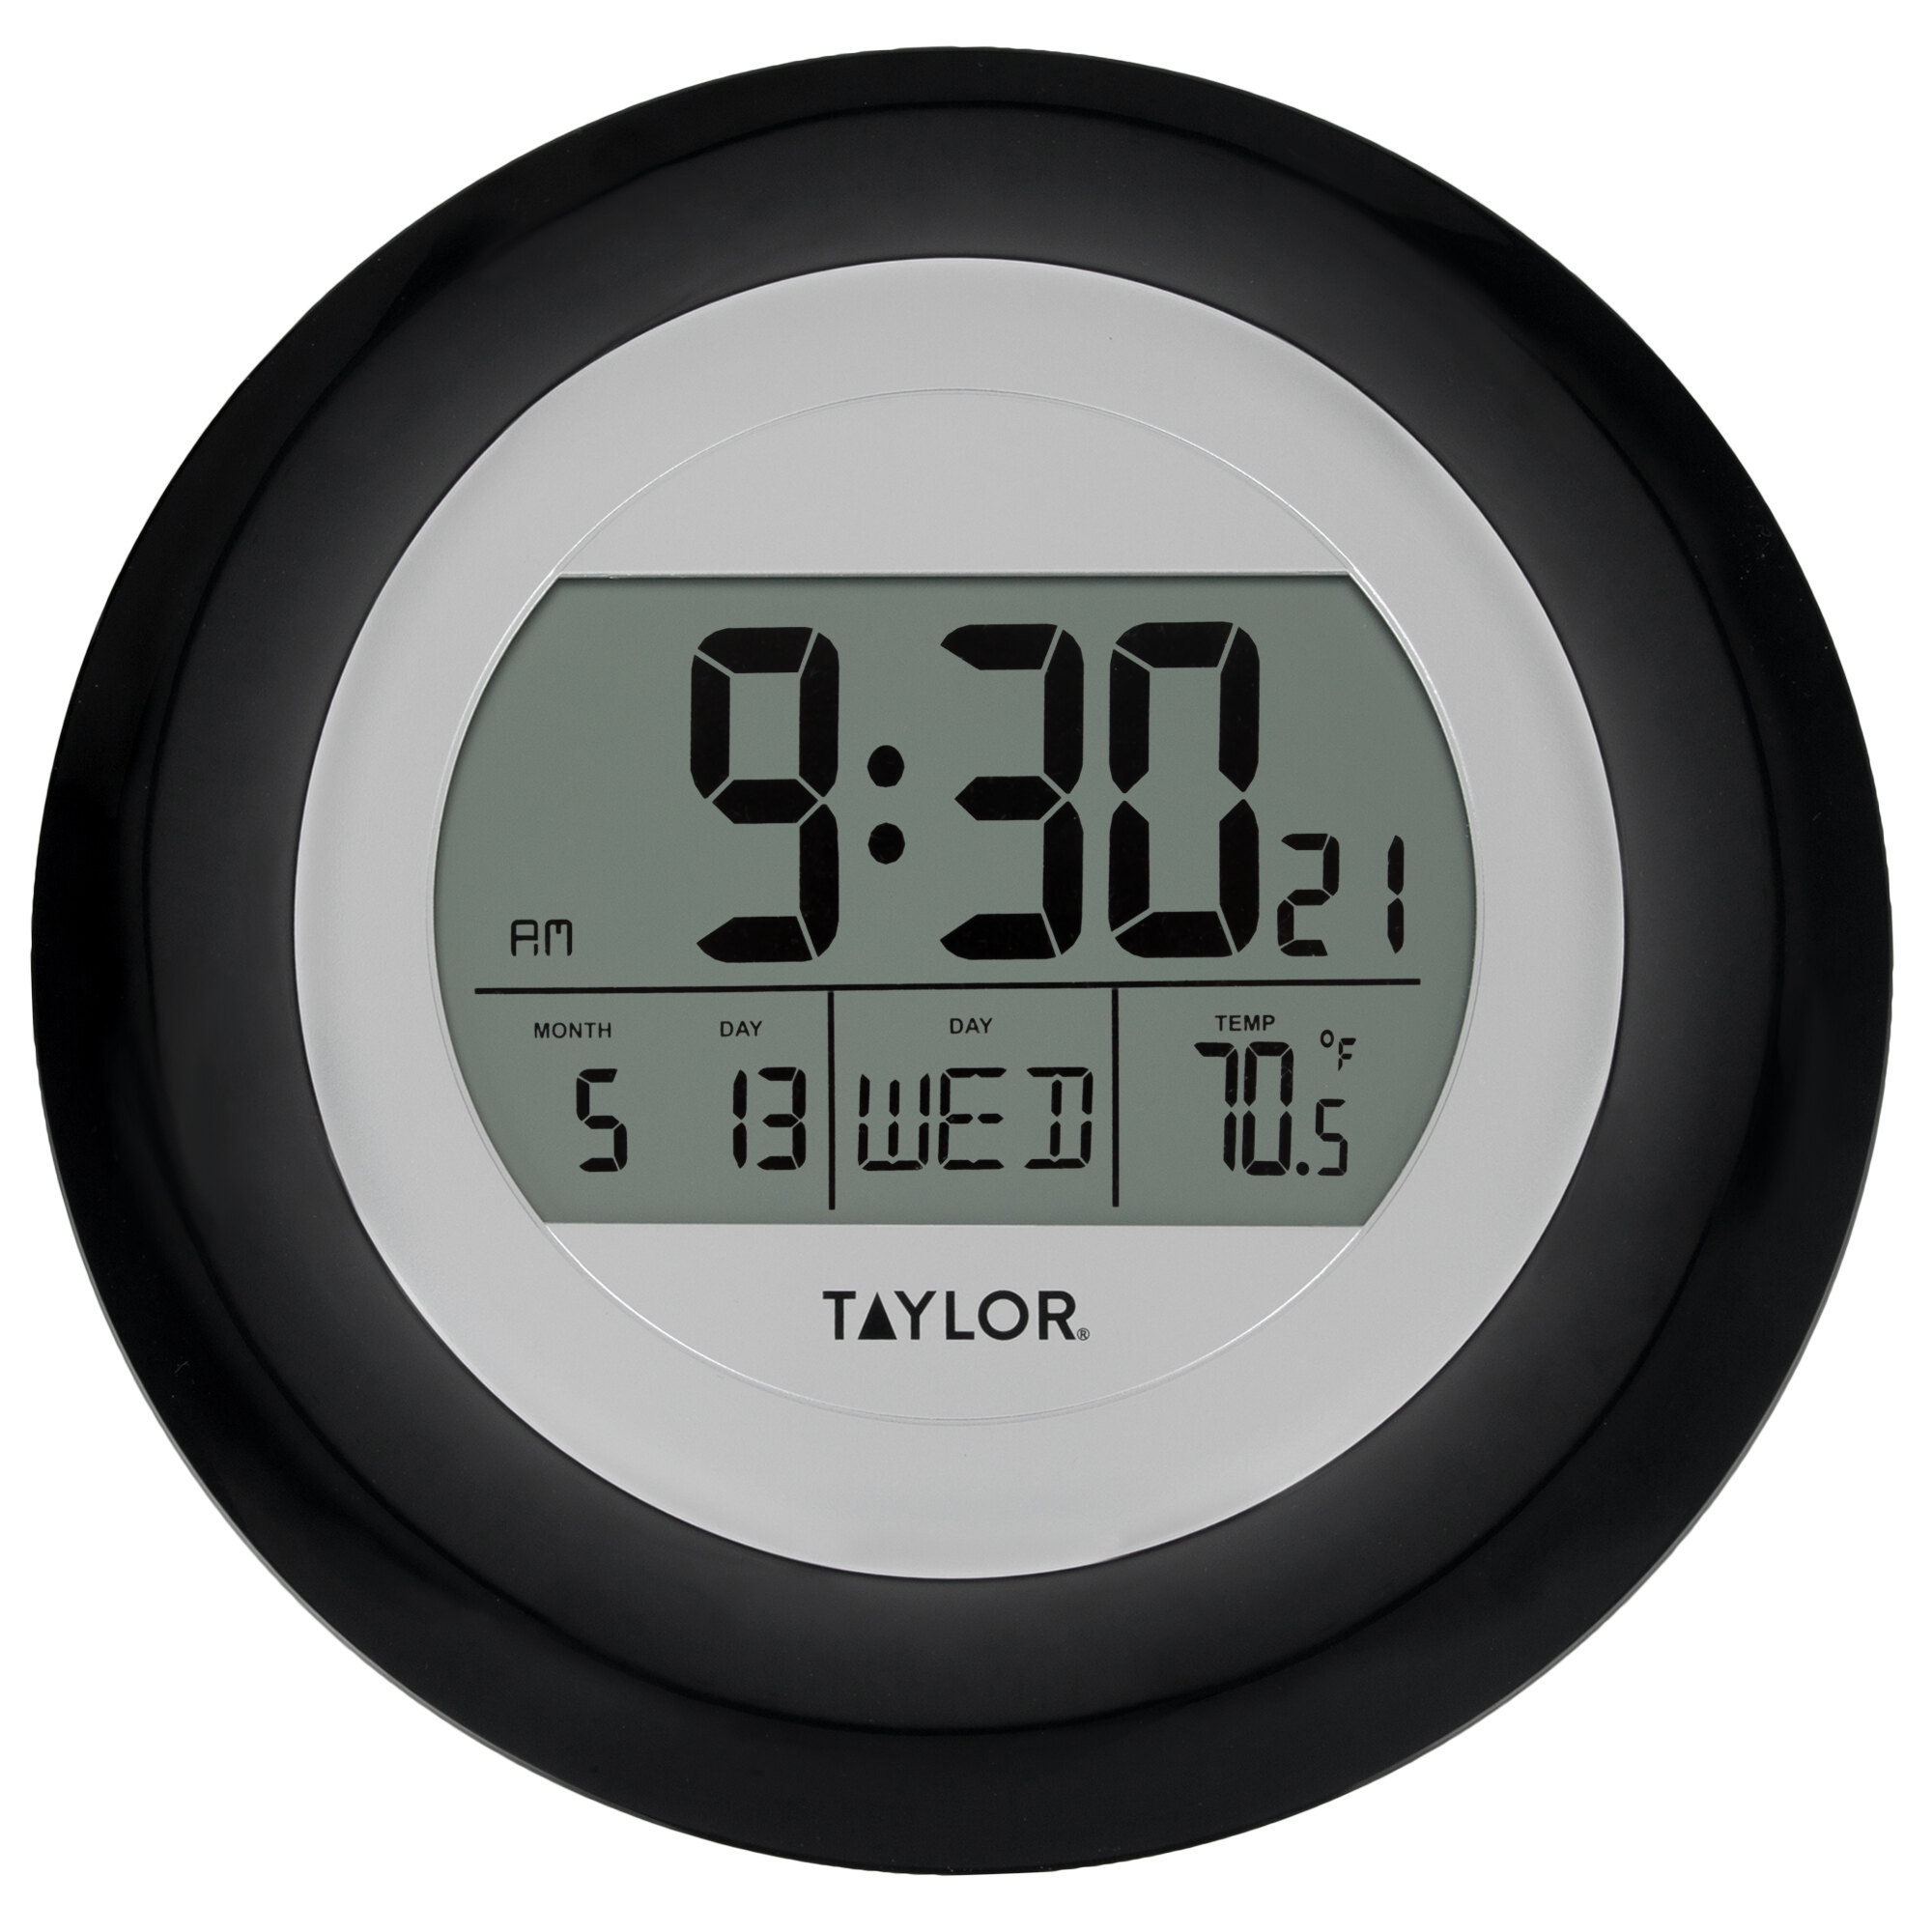 Taylor 1750BK 9 1/4" Black Digital Atomic Wall Clock with Thermometer